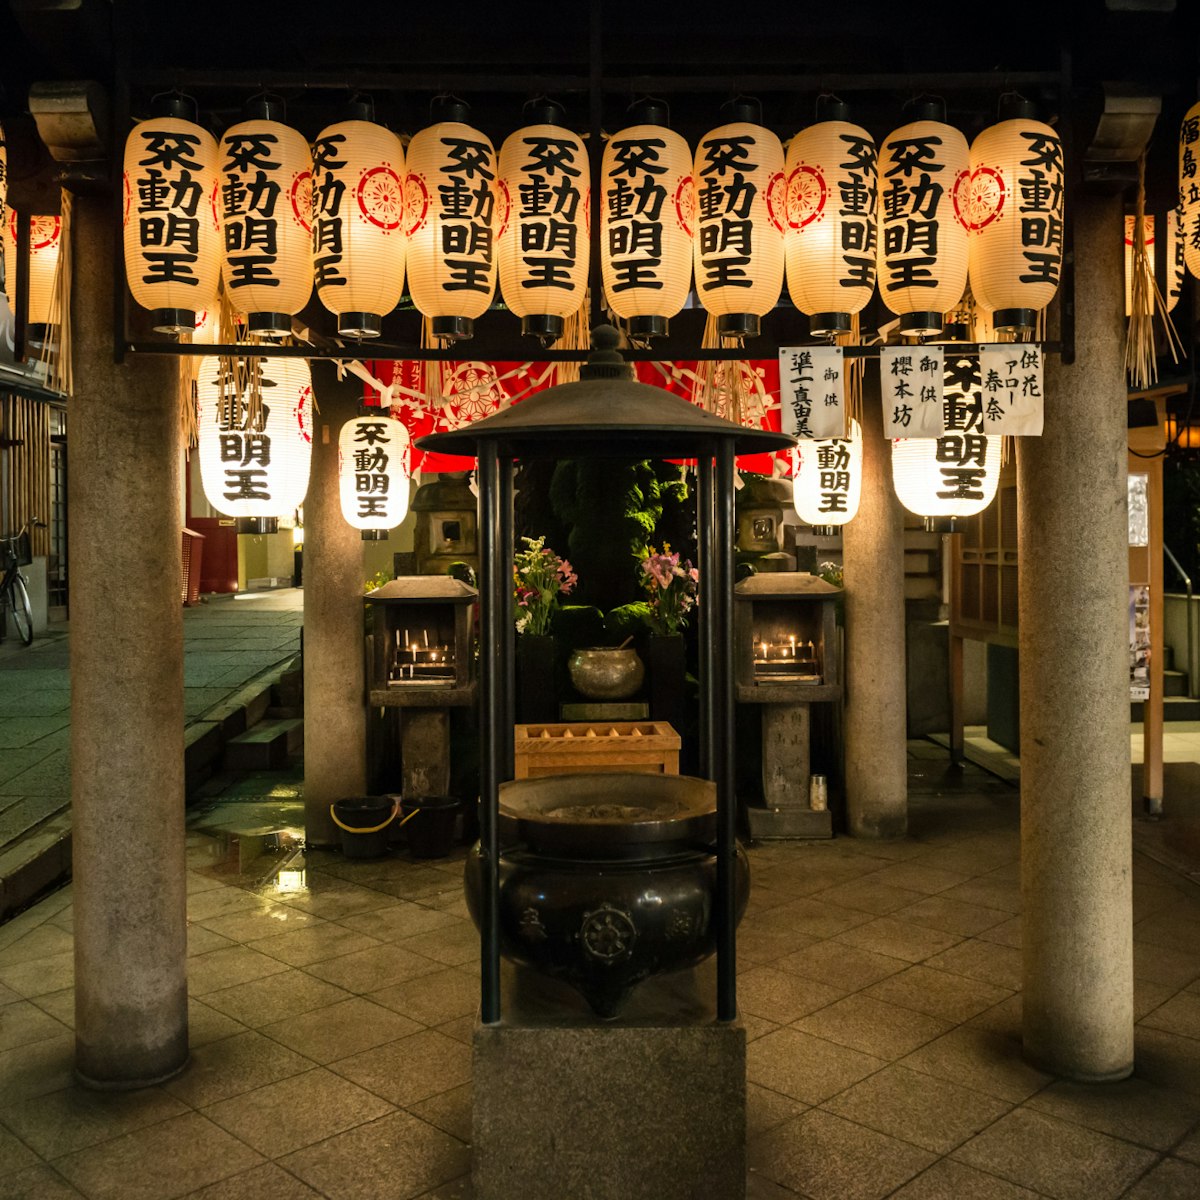 OSAKA, JAPAN - APRIL 6, 2015: Hozenji yokocho buddhist temple in Osaka. ; Shutterstock ID 270413630; Your name (First / Last): Laura Crawford; GL account no.: 65050; Netsuite department name: Online Editorial; Full Product or Project name including edition: Osaka city app POI images